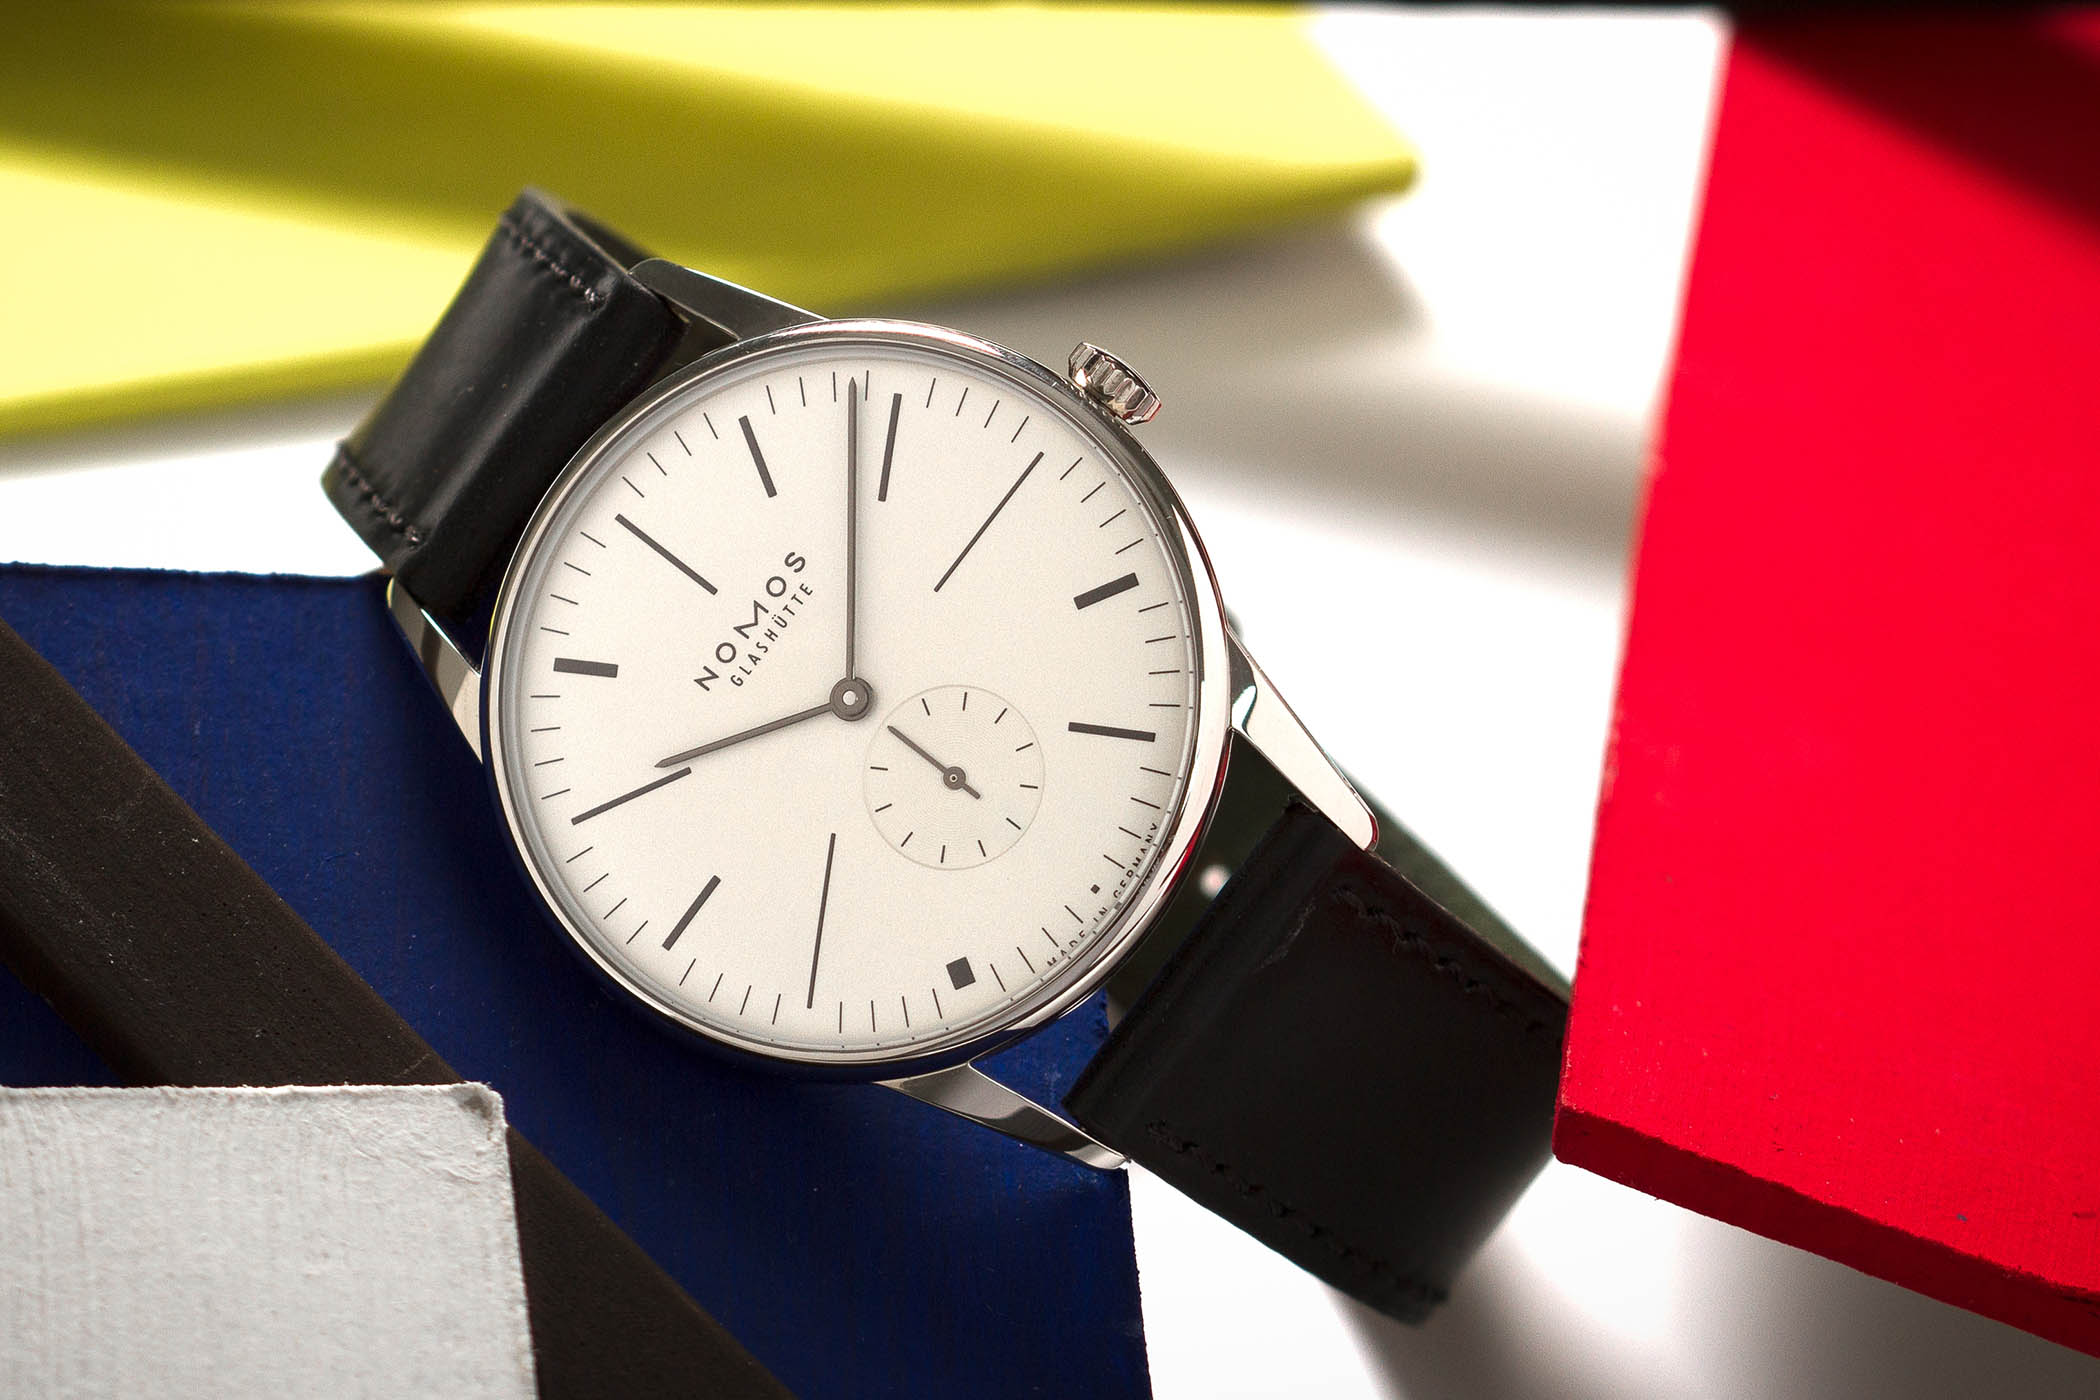 NOMOS De Stijl Limited Edition Orion Watch for Ace Jewelers